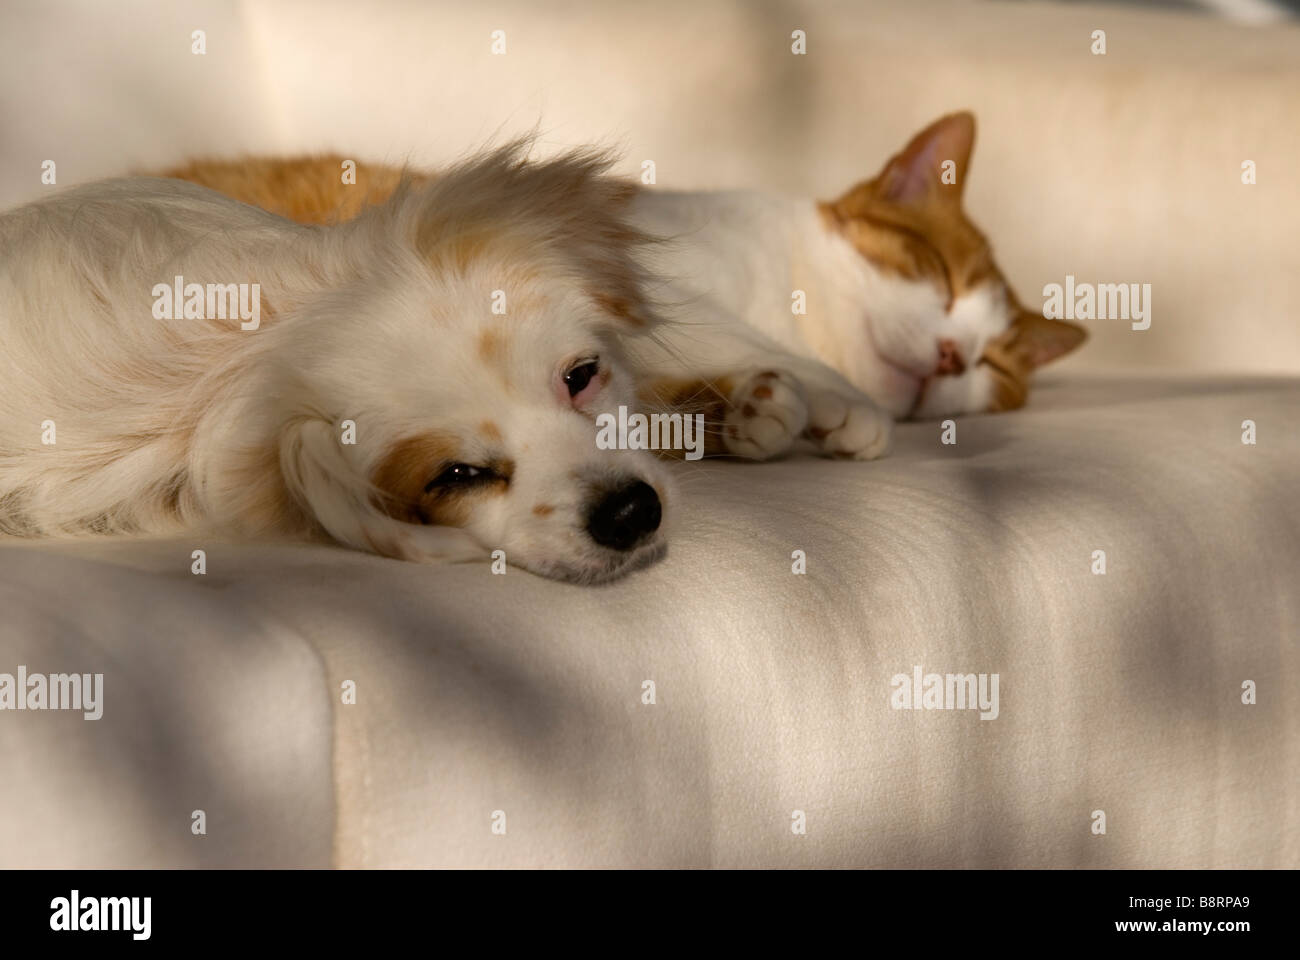 Small white dog and cat resting on sofa Stock Photo